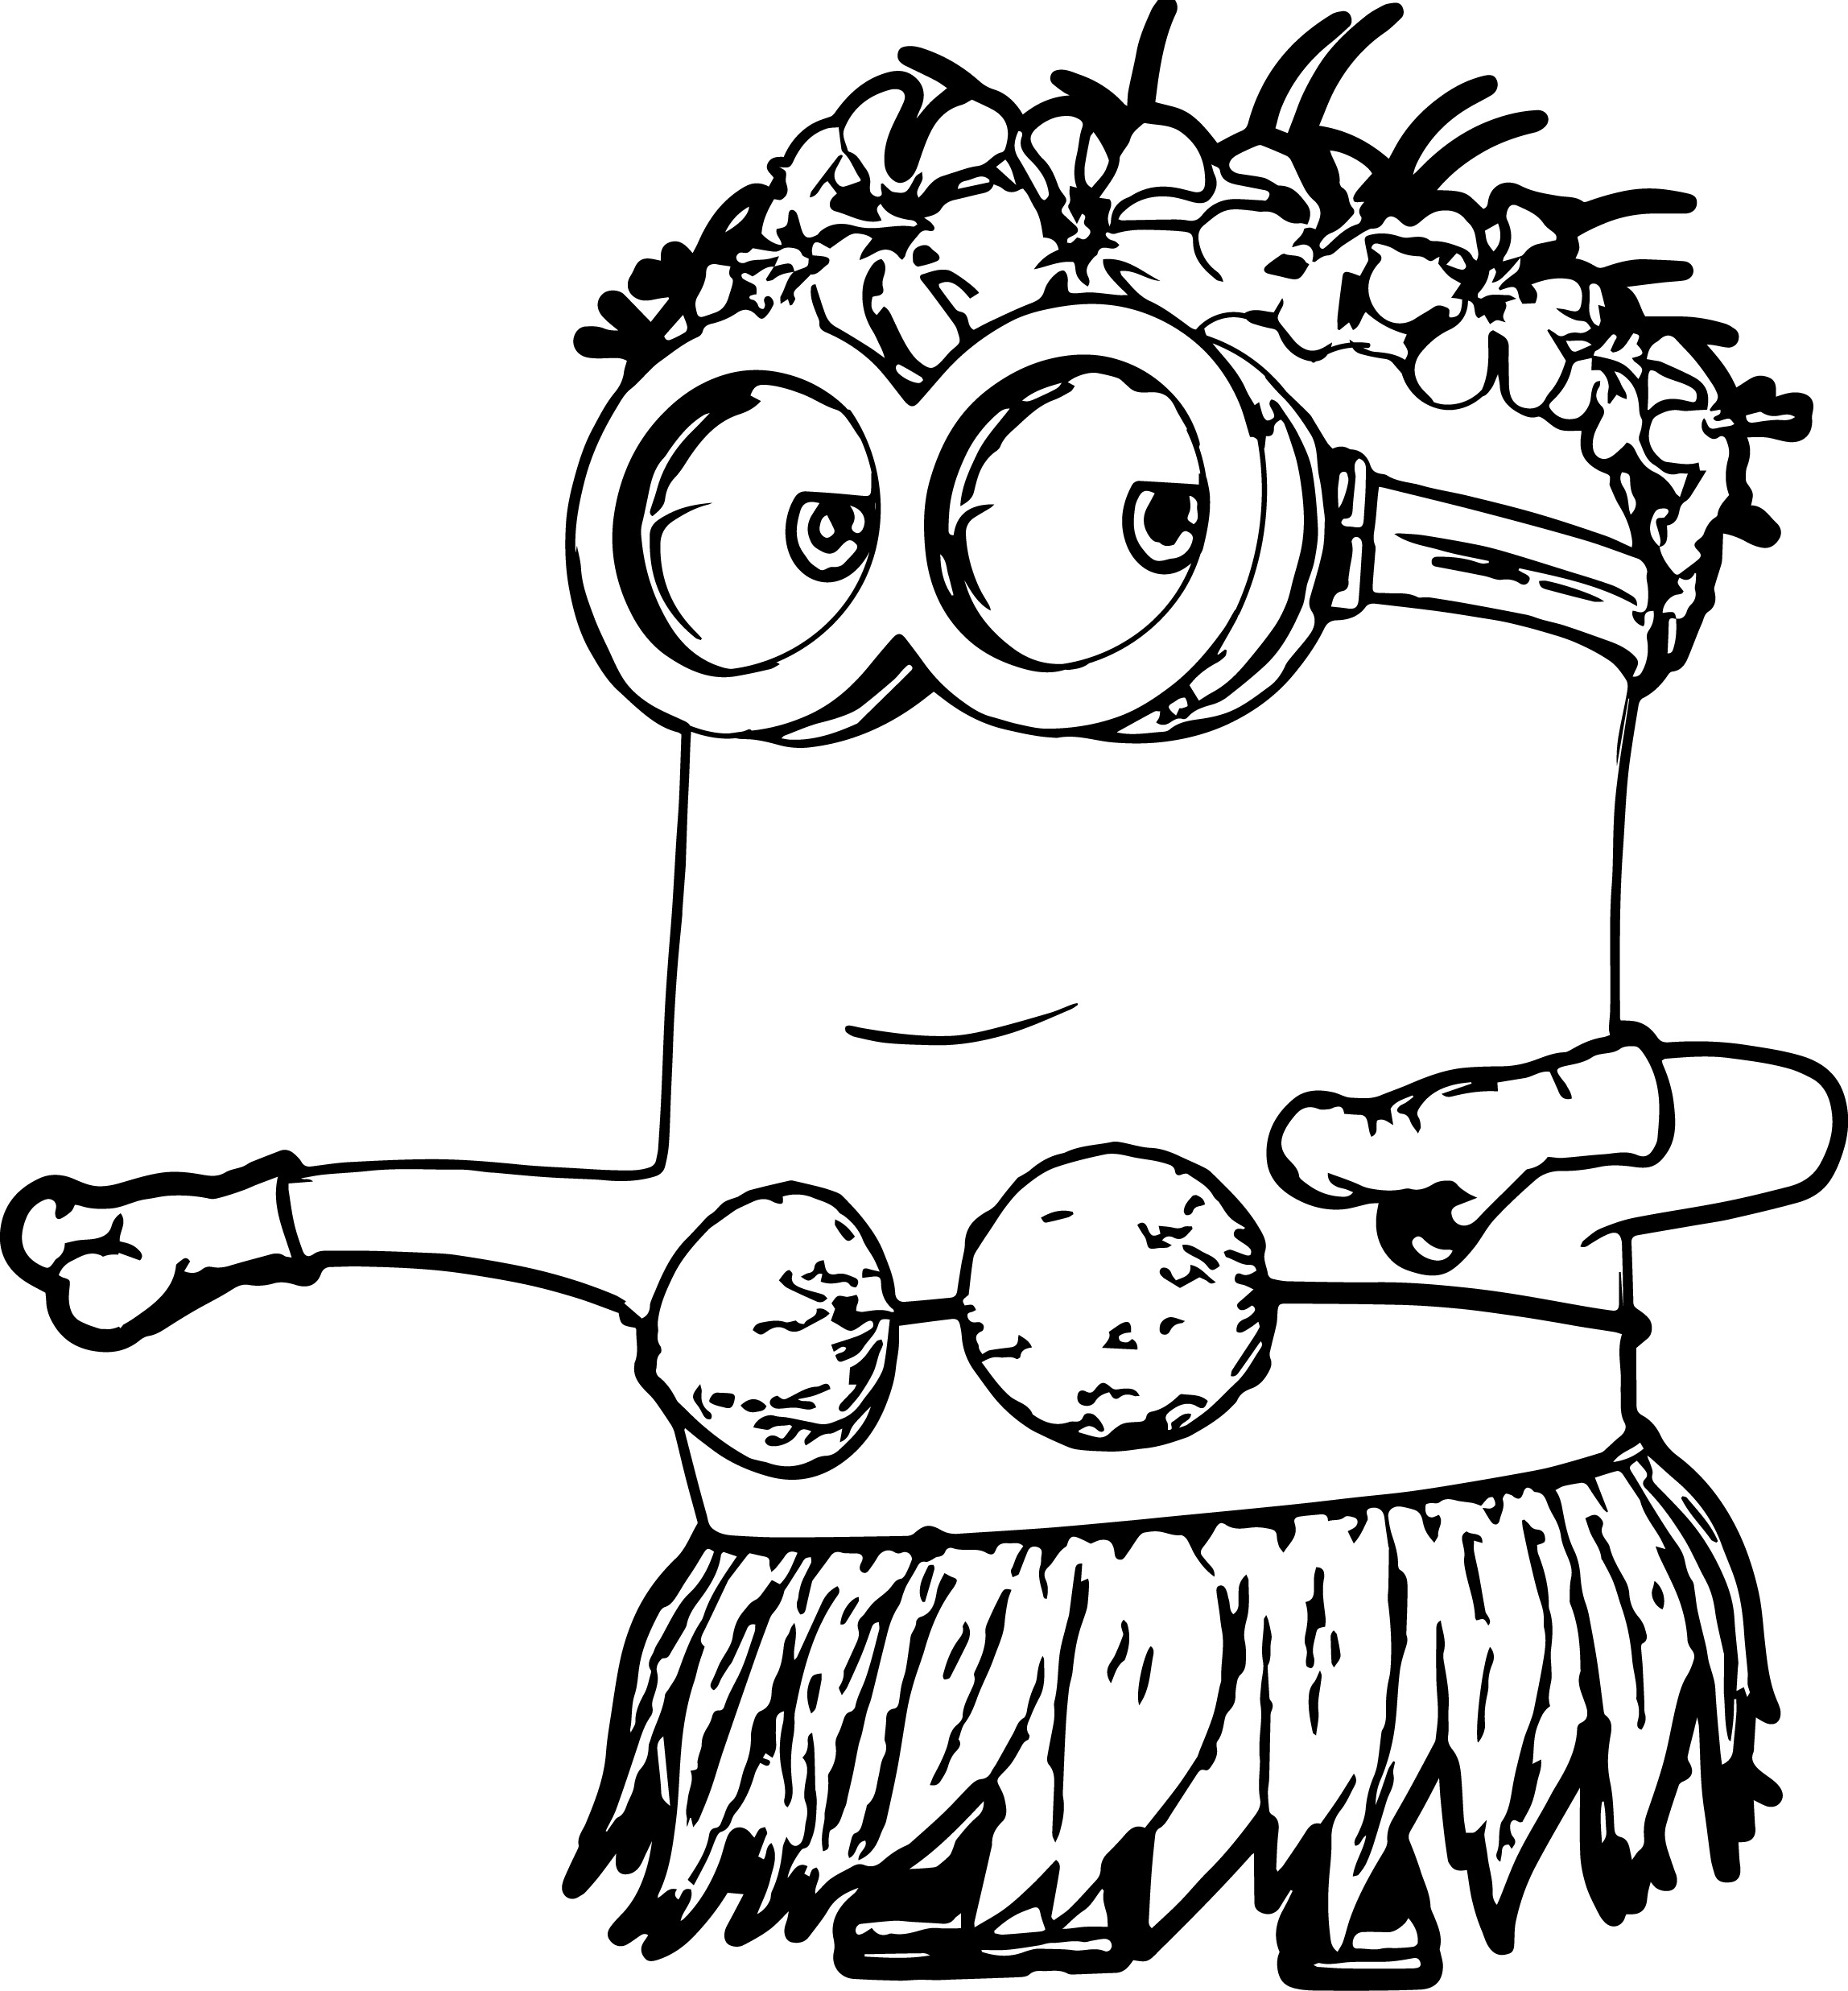 minion printable coloring pages minion coloring pages best coloring pages for kids minion coloring pages printable 1 1